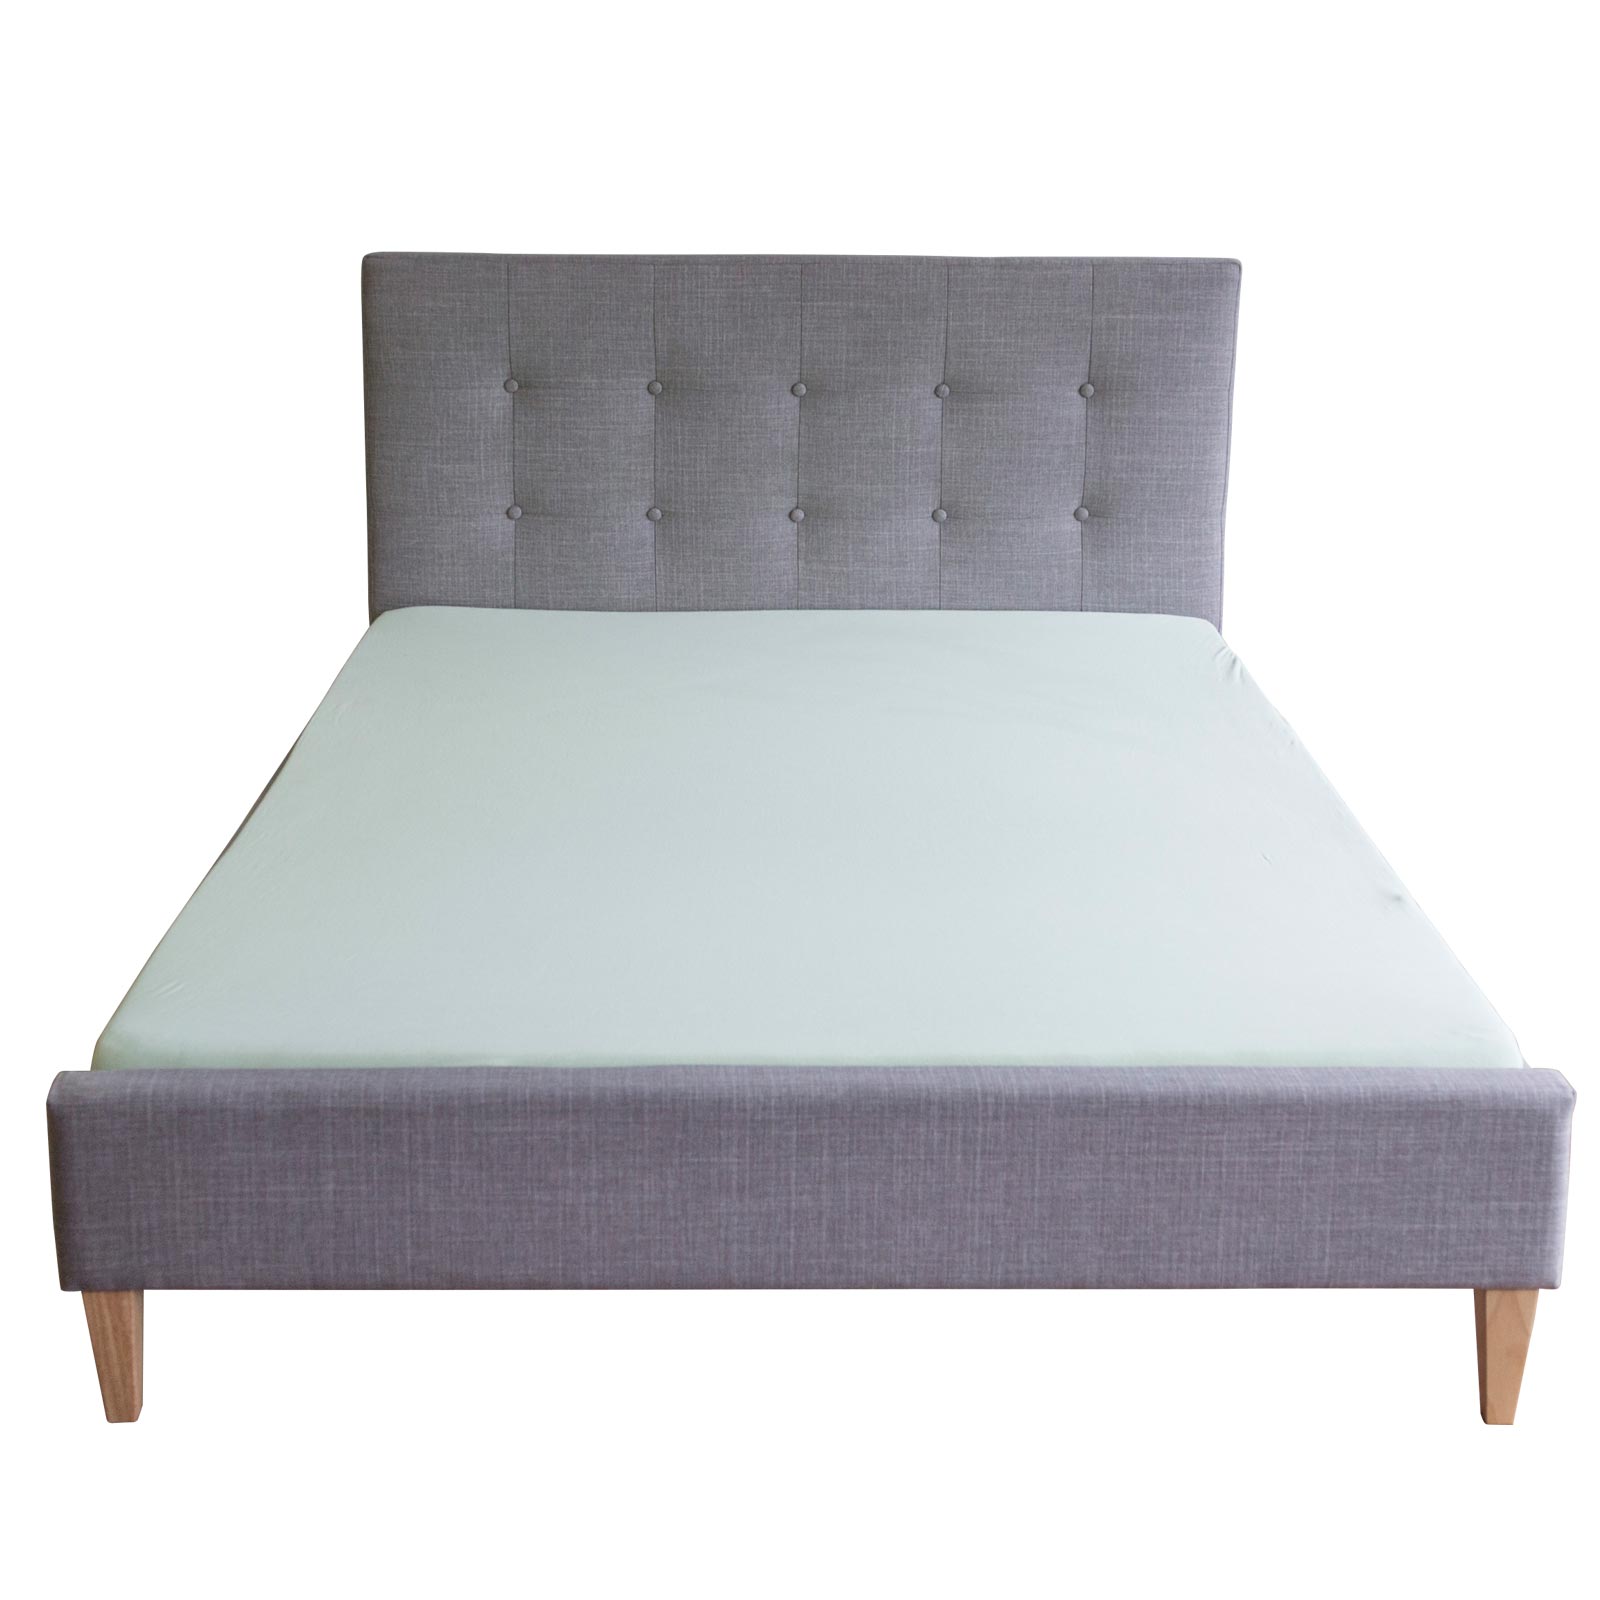 Upholstered Bed Frame Double Bed 180x200 Grey Platform Bed Fabric Headboard